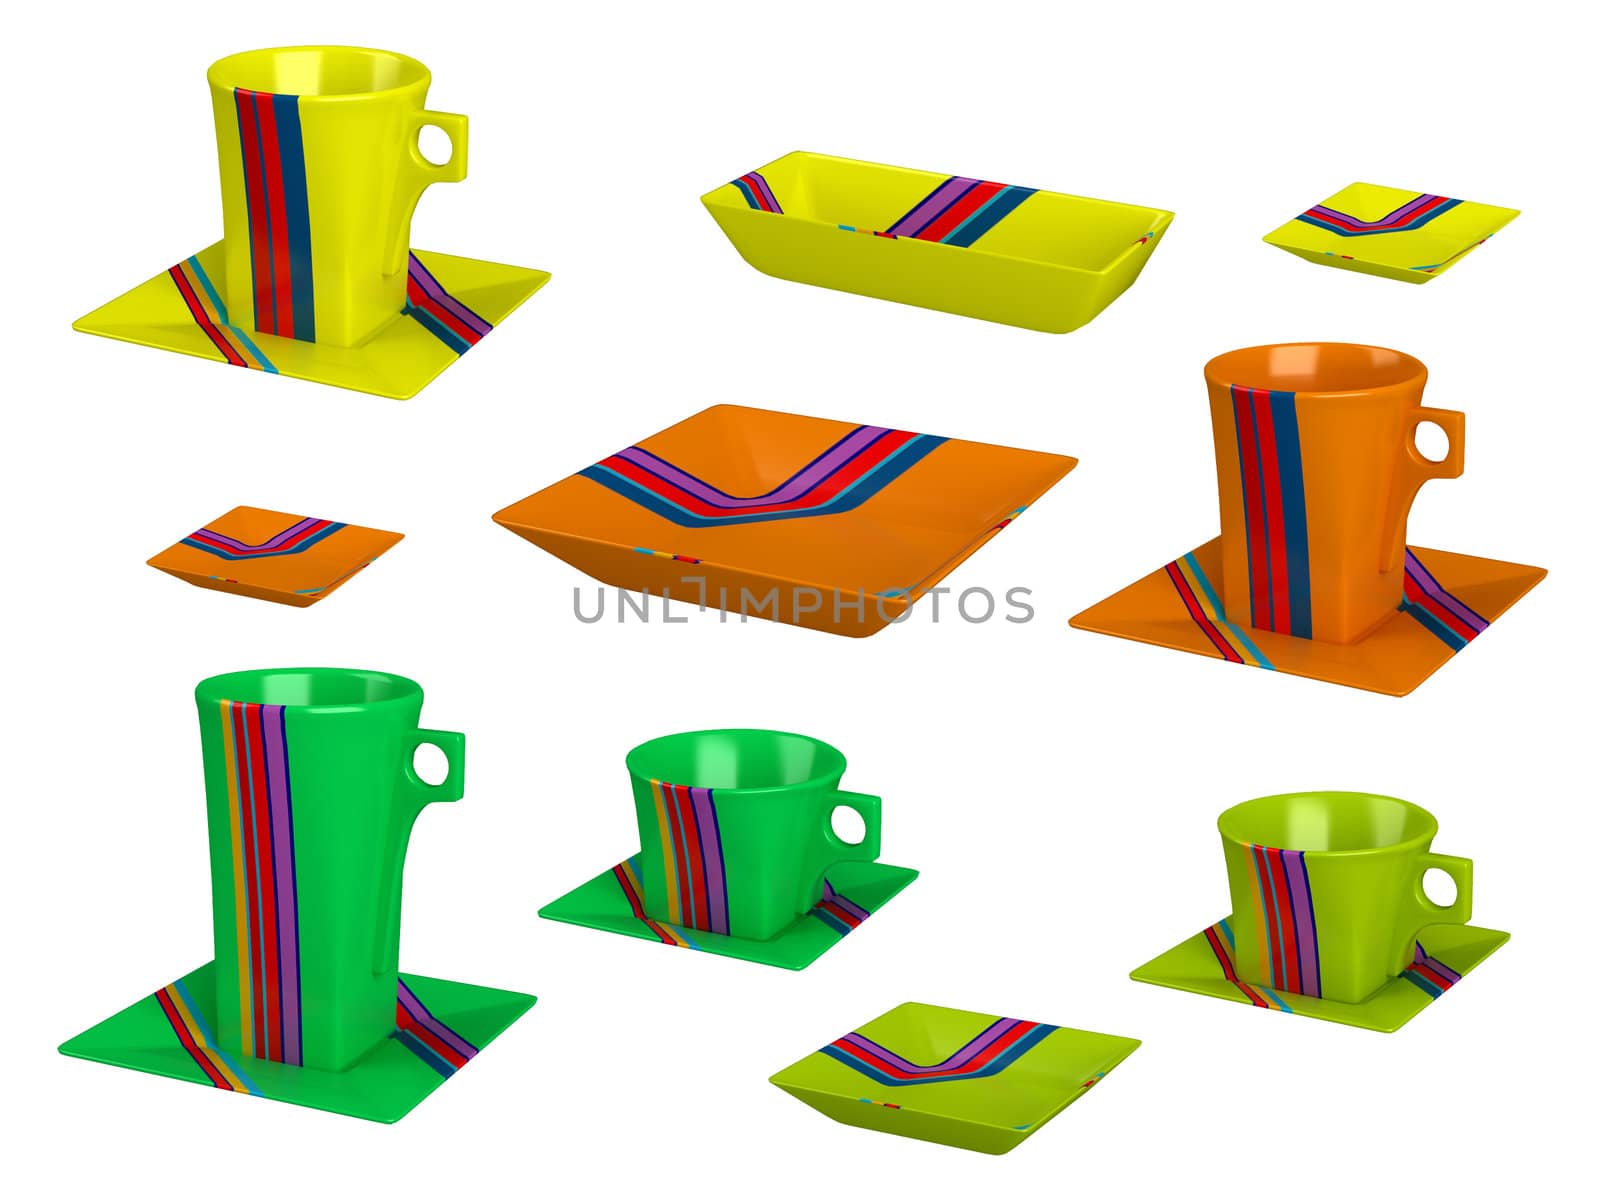 Cups and dishes isolated on white background